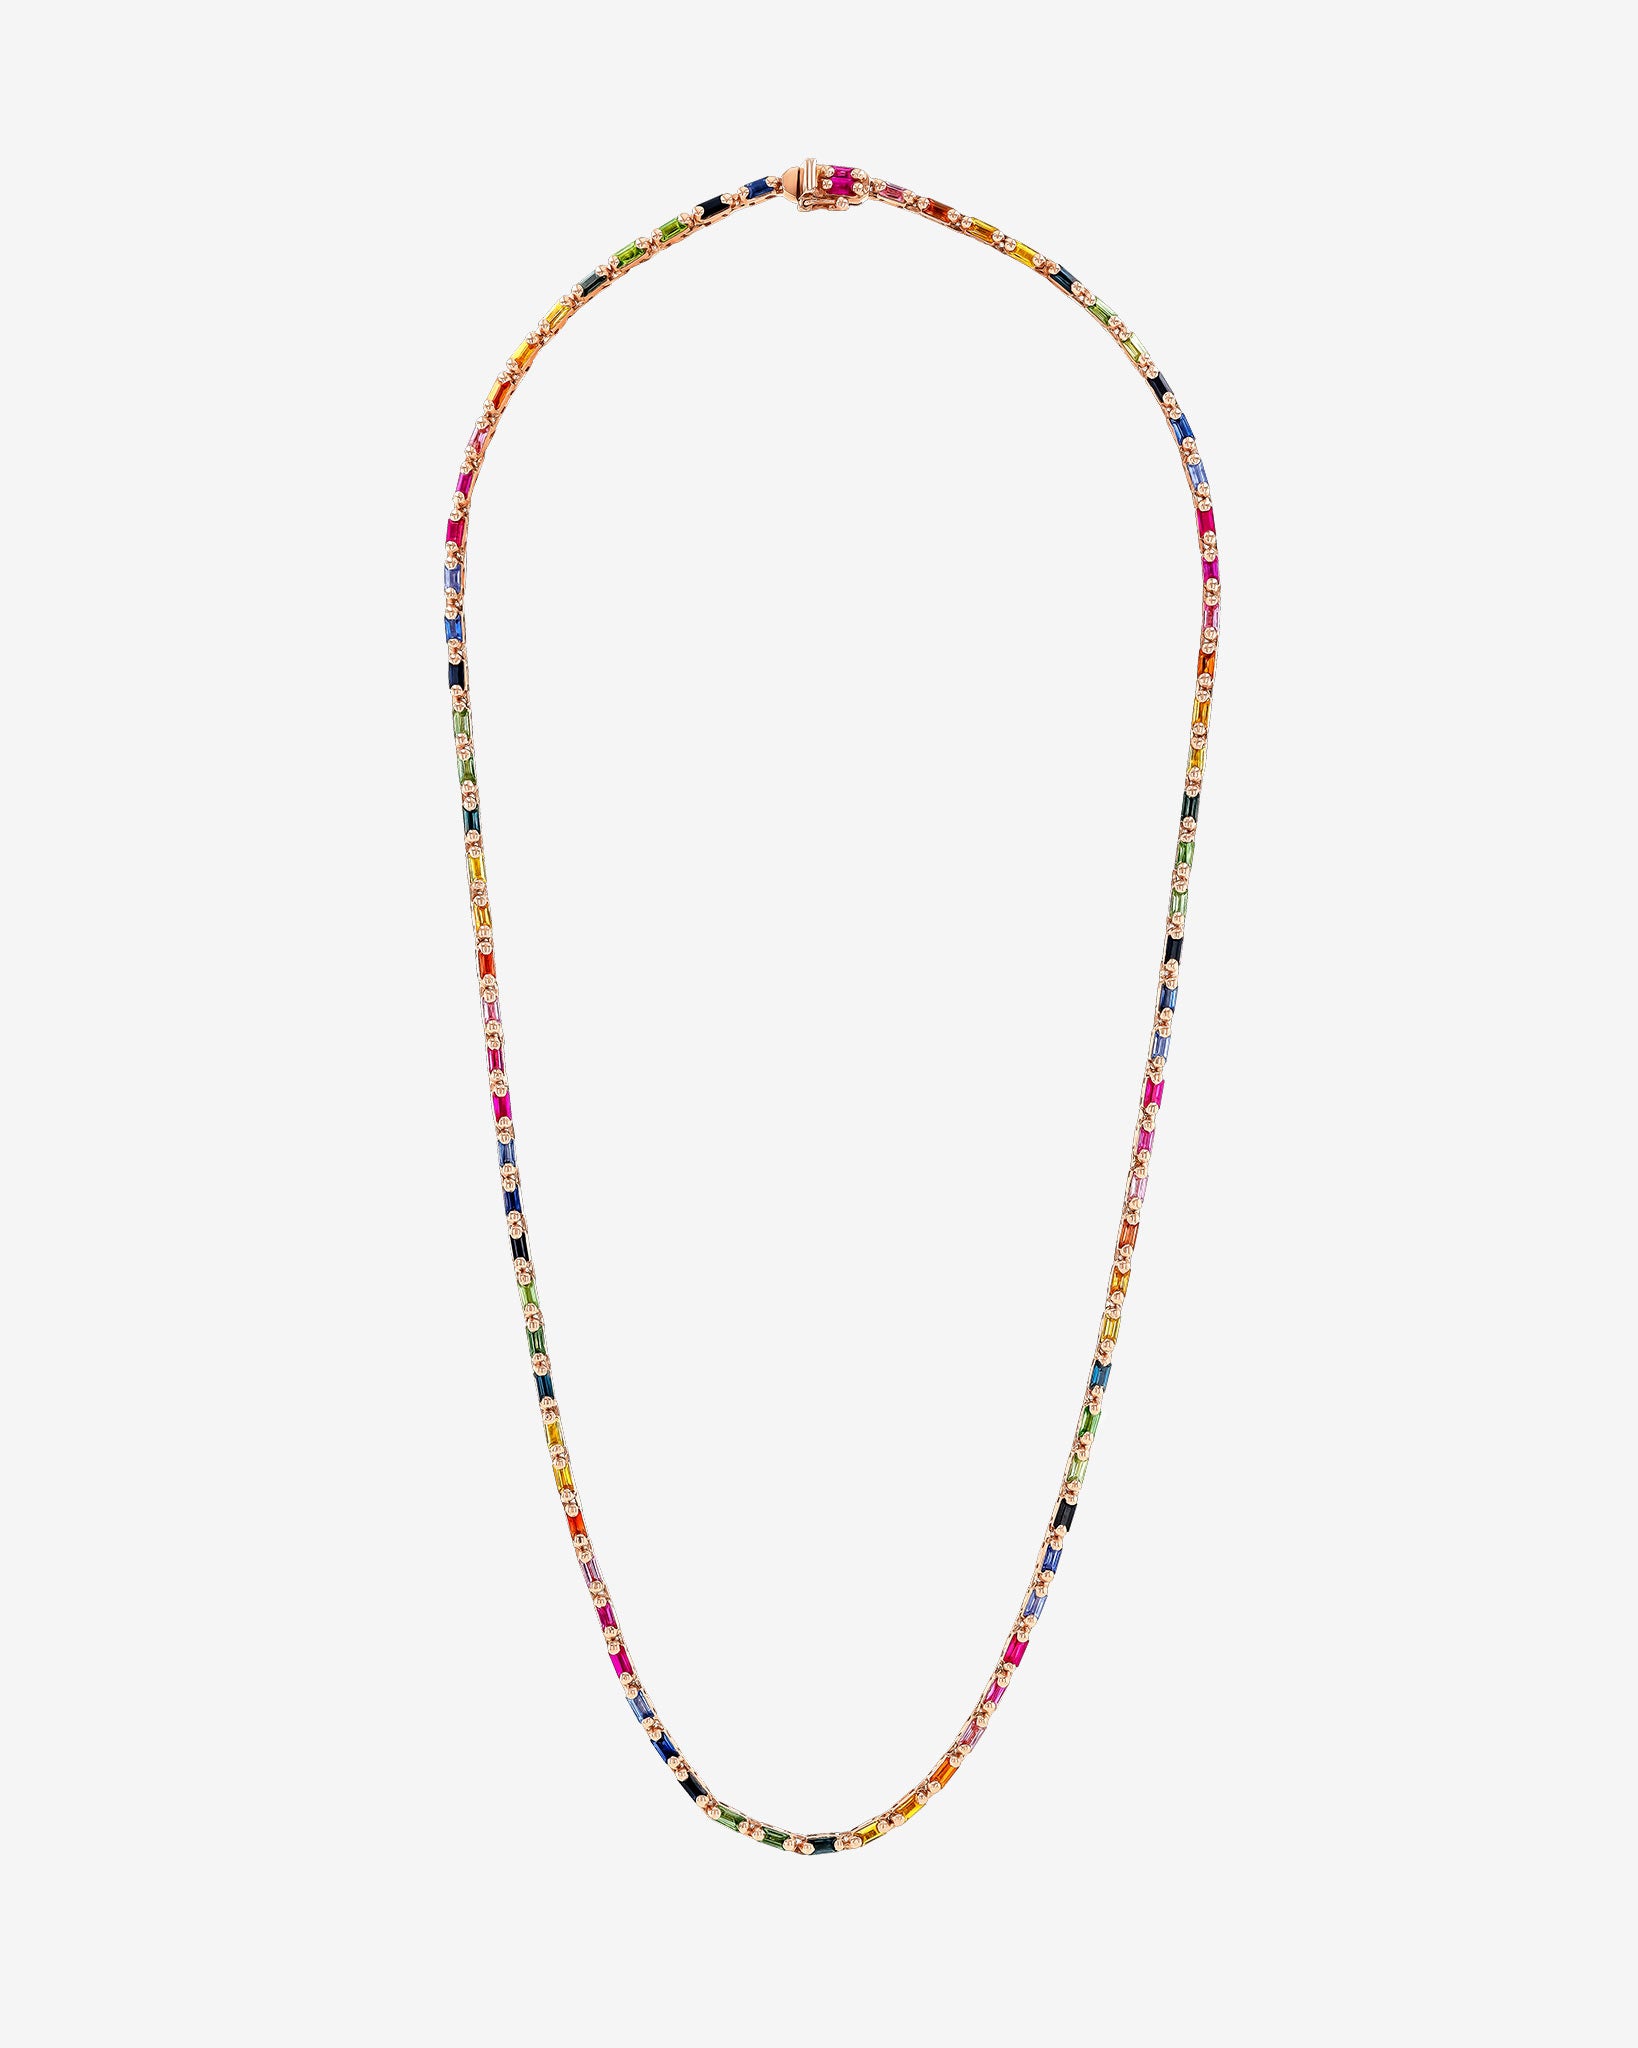 Suzanne Kalan Linear Full Rainbow Sapphire Tennis Necklace in 18k rose gold